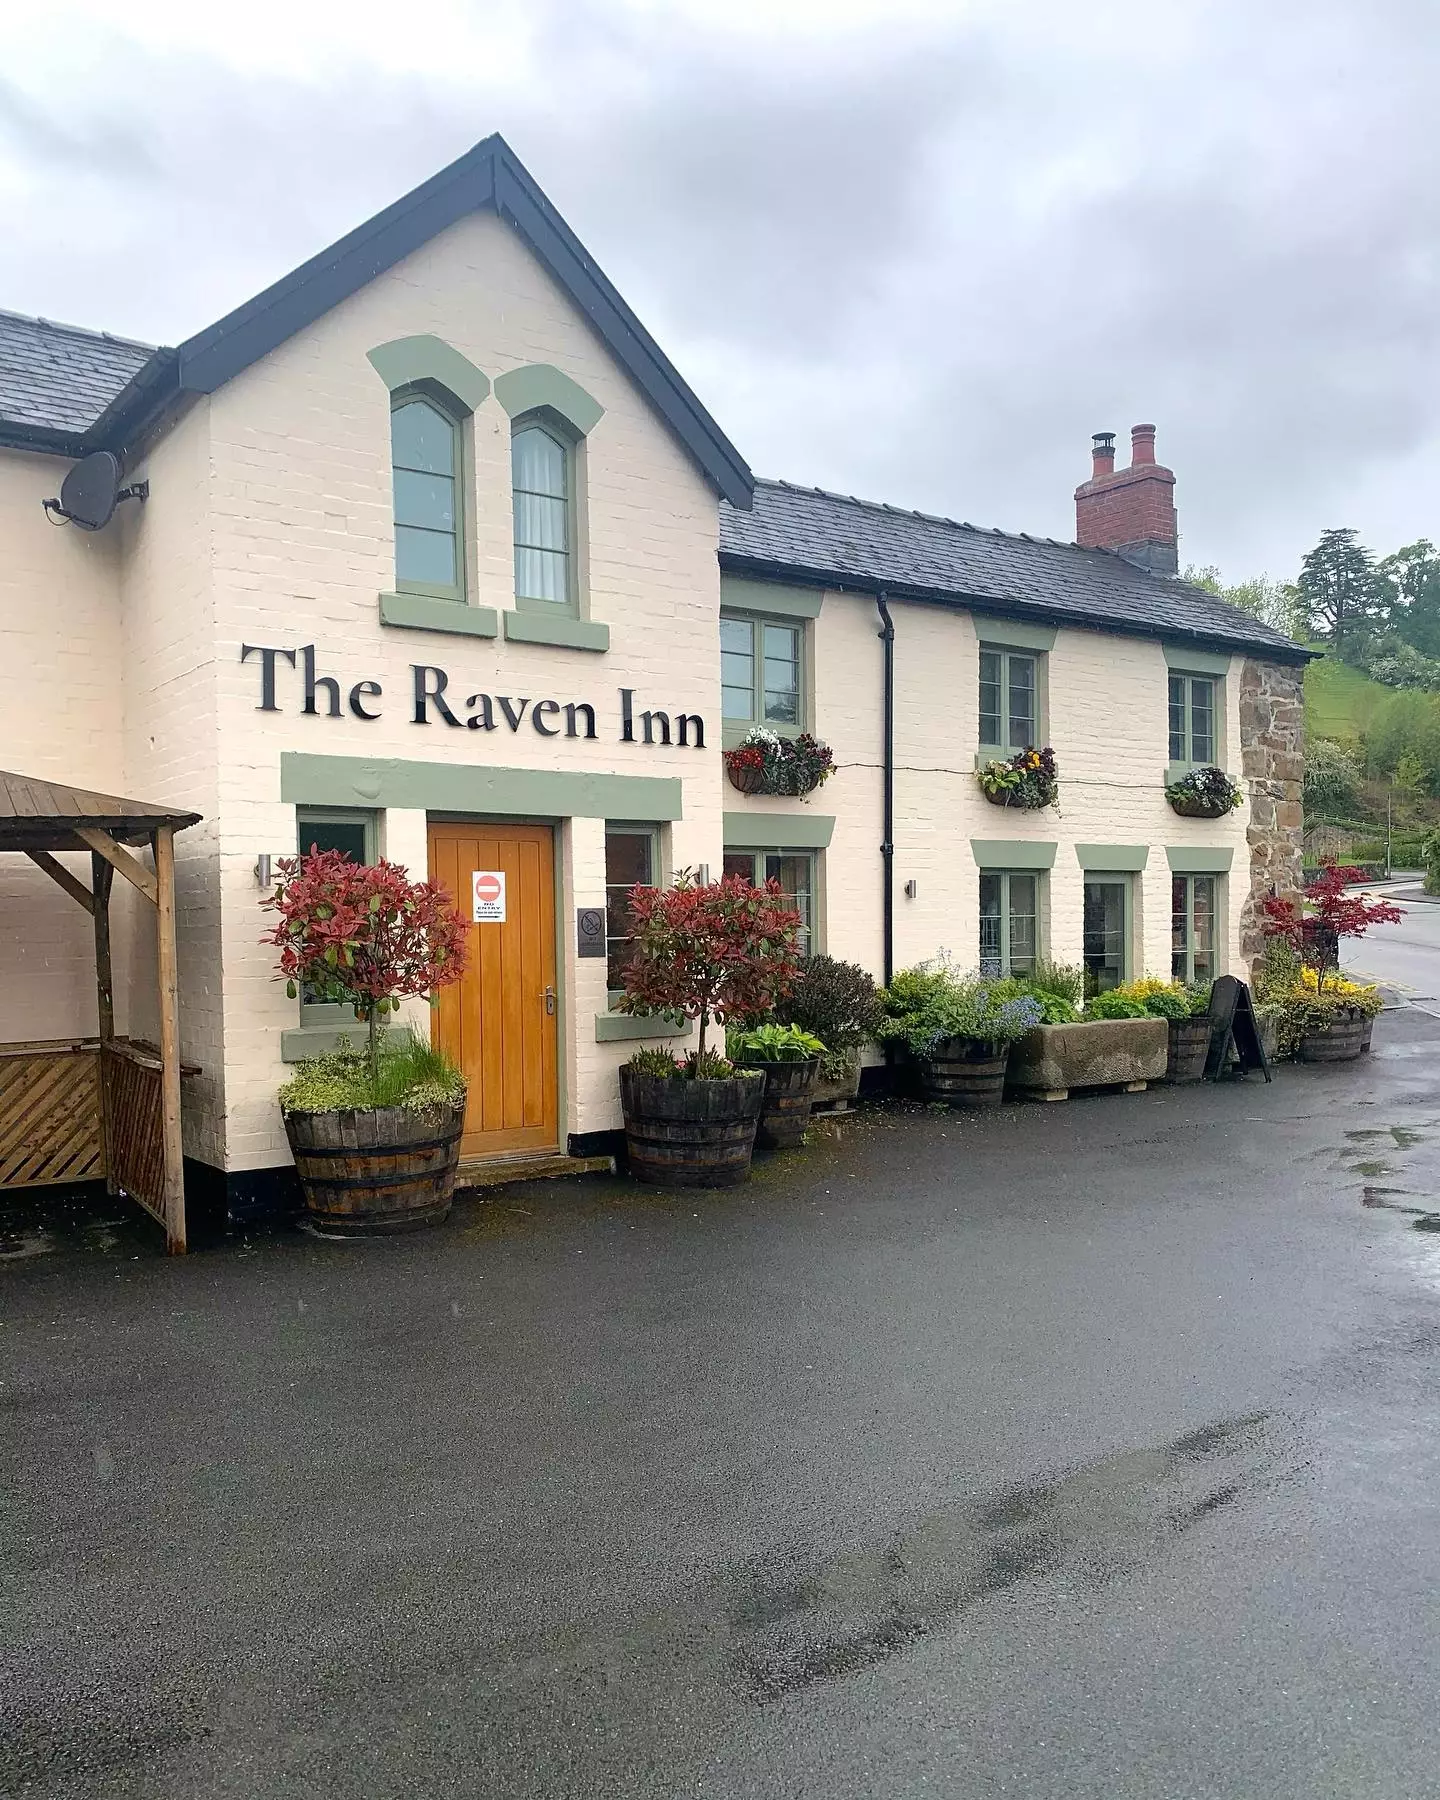 The pub made the decision after social media backlash.